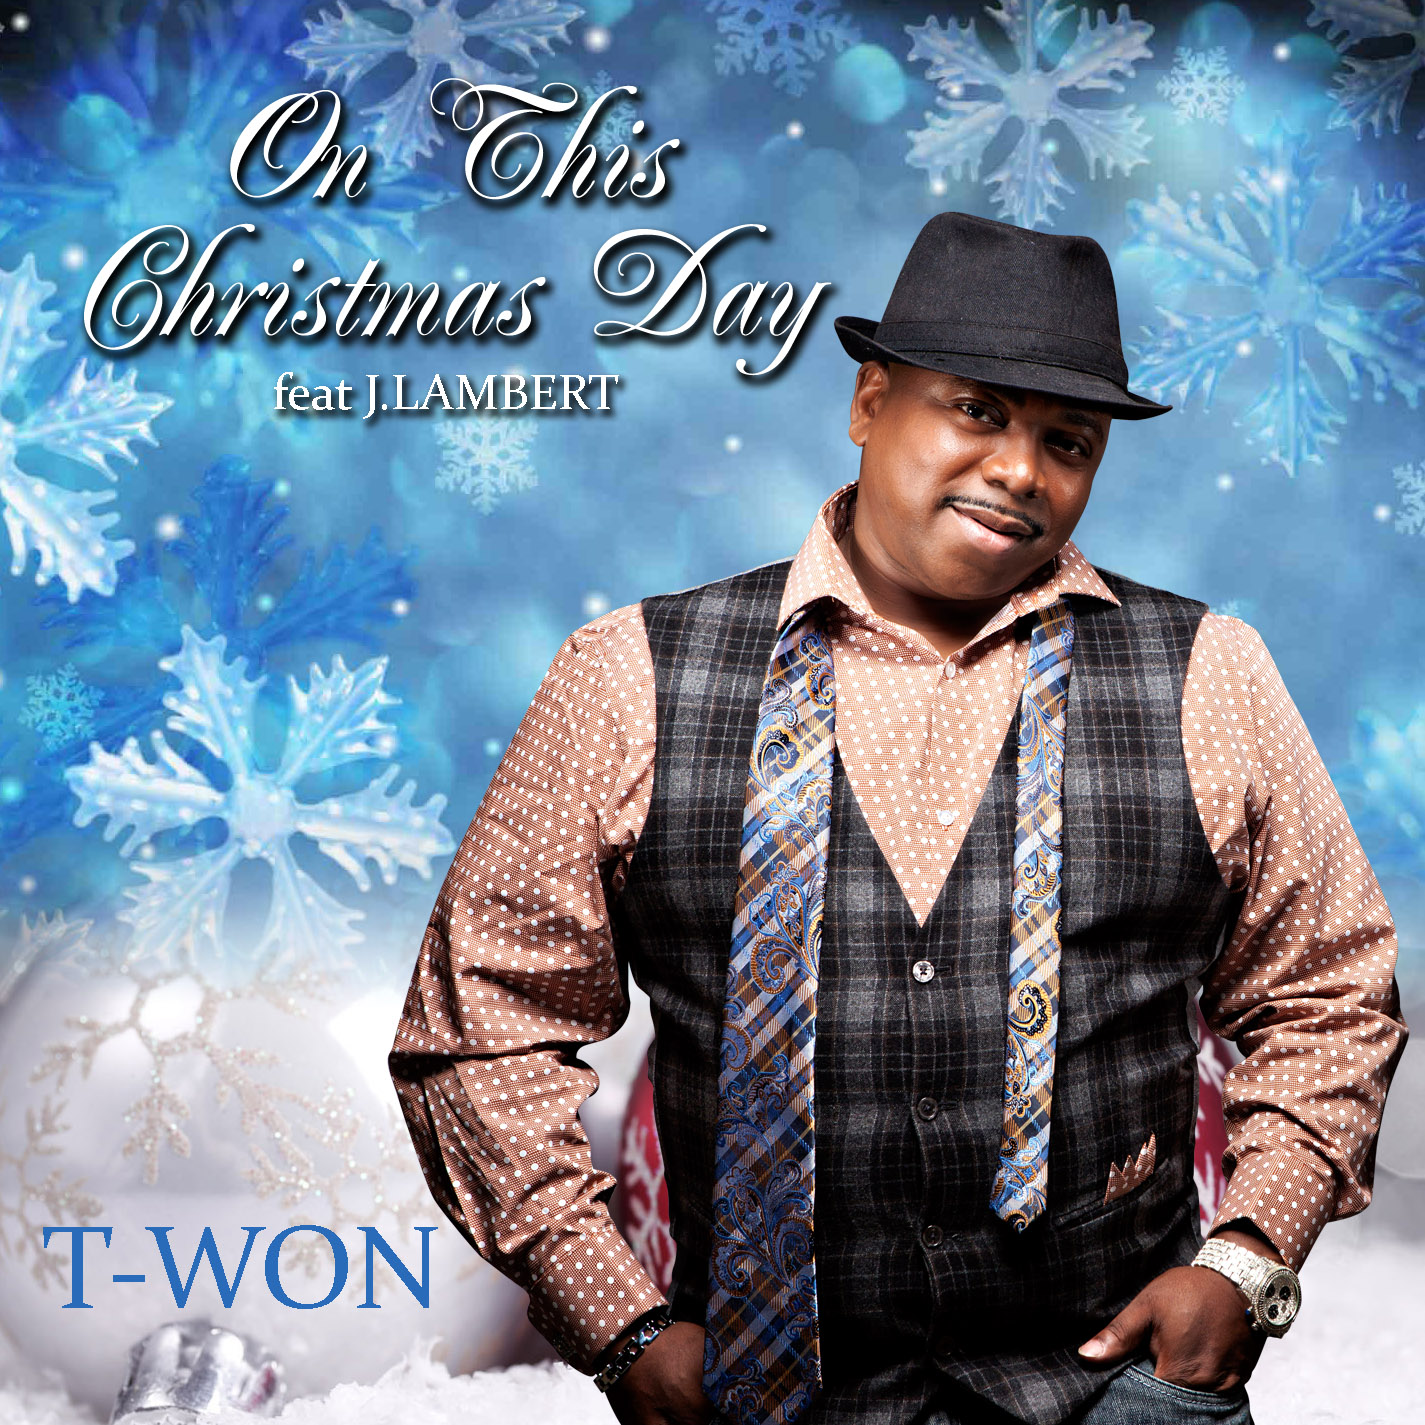 Art for ON THIS CHRISTMAS DAY by T-WON PRICE feat J.LAMBERT